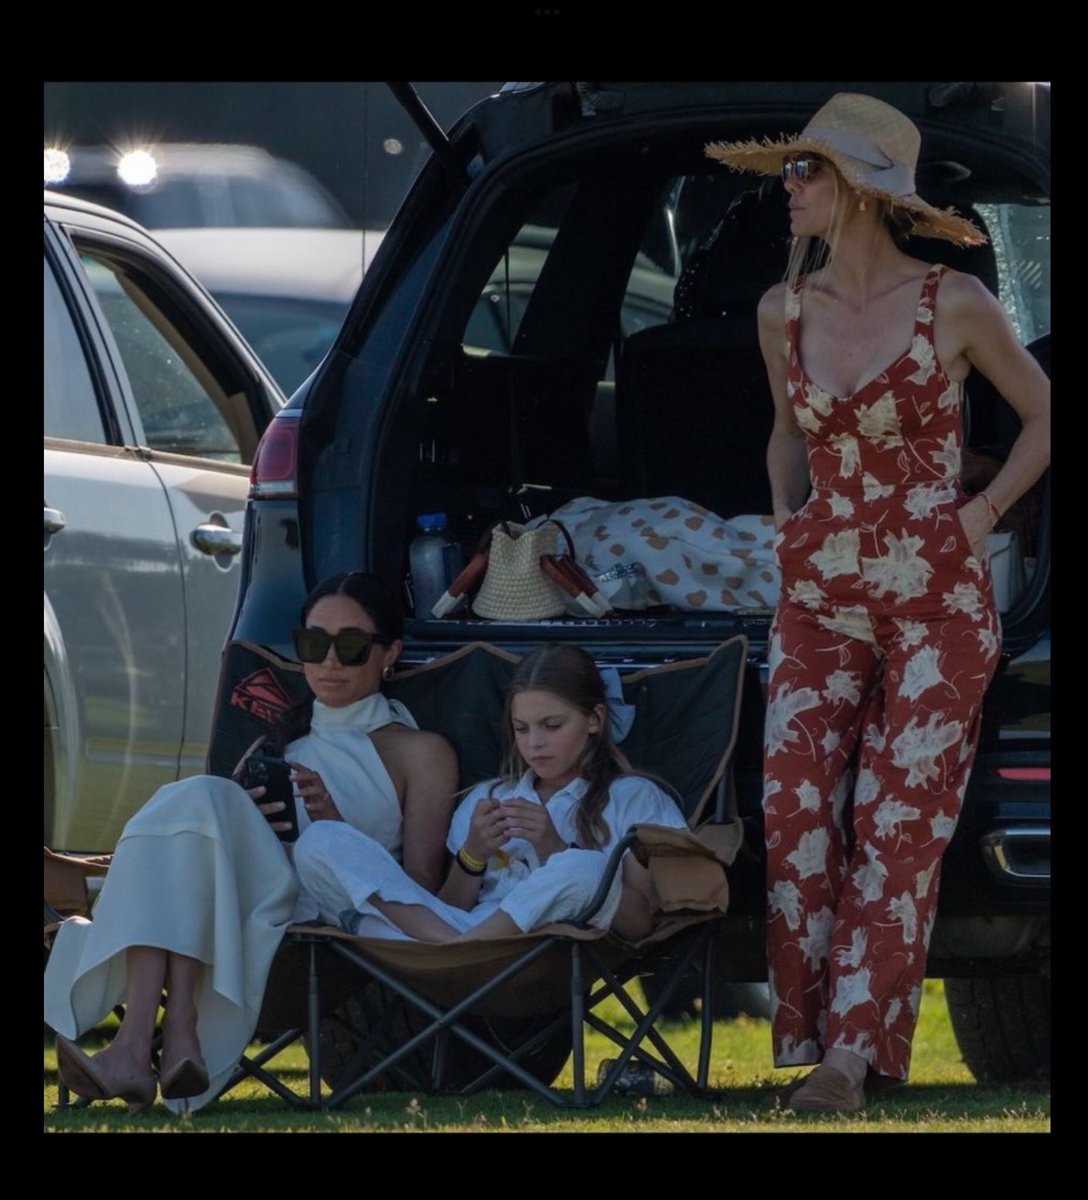 It's night & day, one mum interacting & having fun with the kids at the polo 🐎 the other on her📱 ignoring her friend & her friends daughter, utterly self absorbed, bored & probably checking X for 📸 of herself at the match. Does anything interest this woman apart from herself?